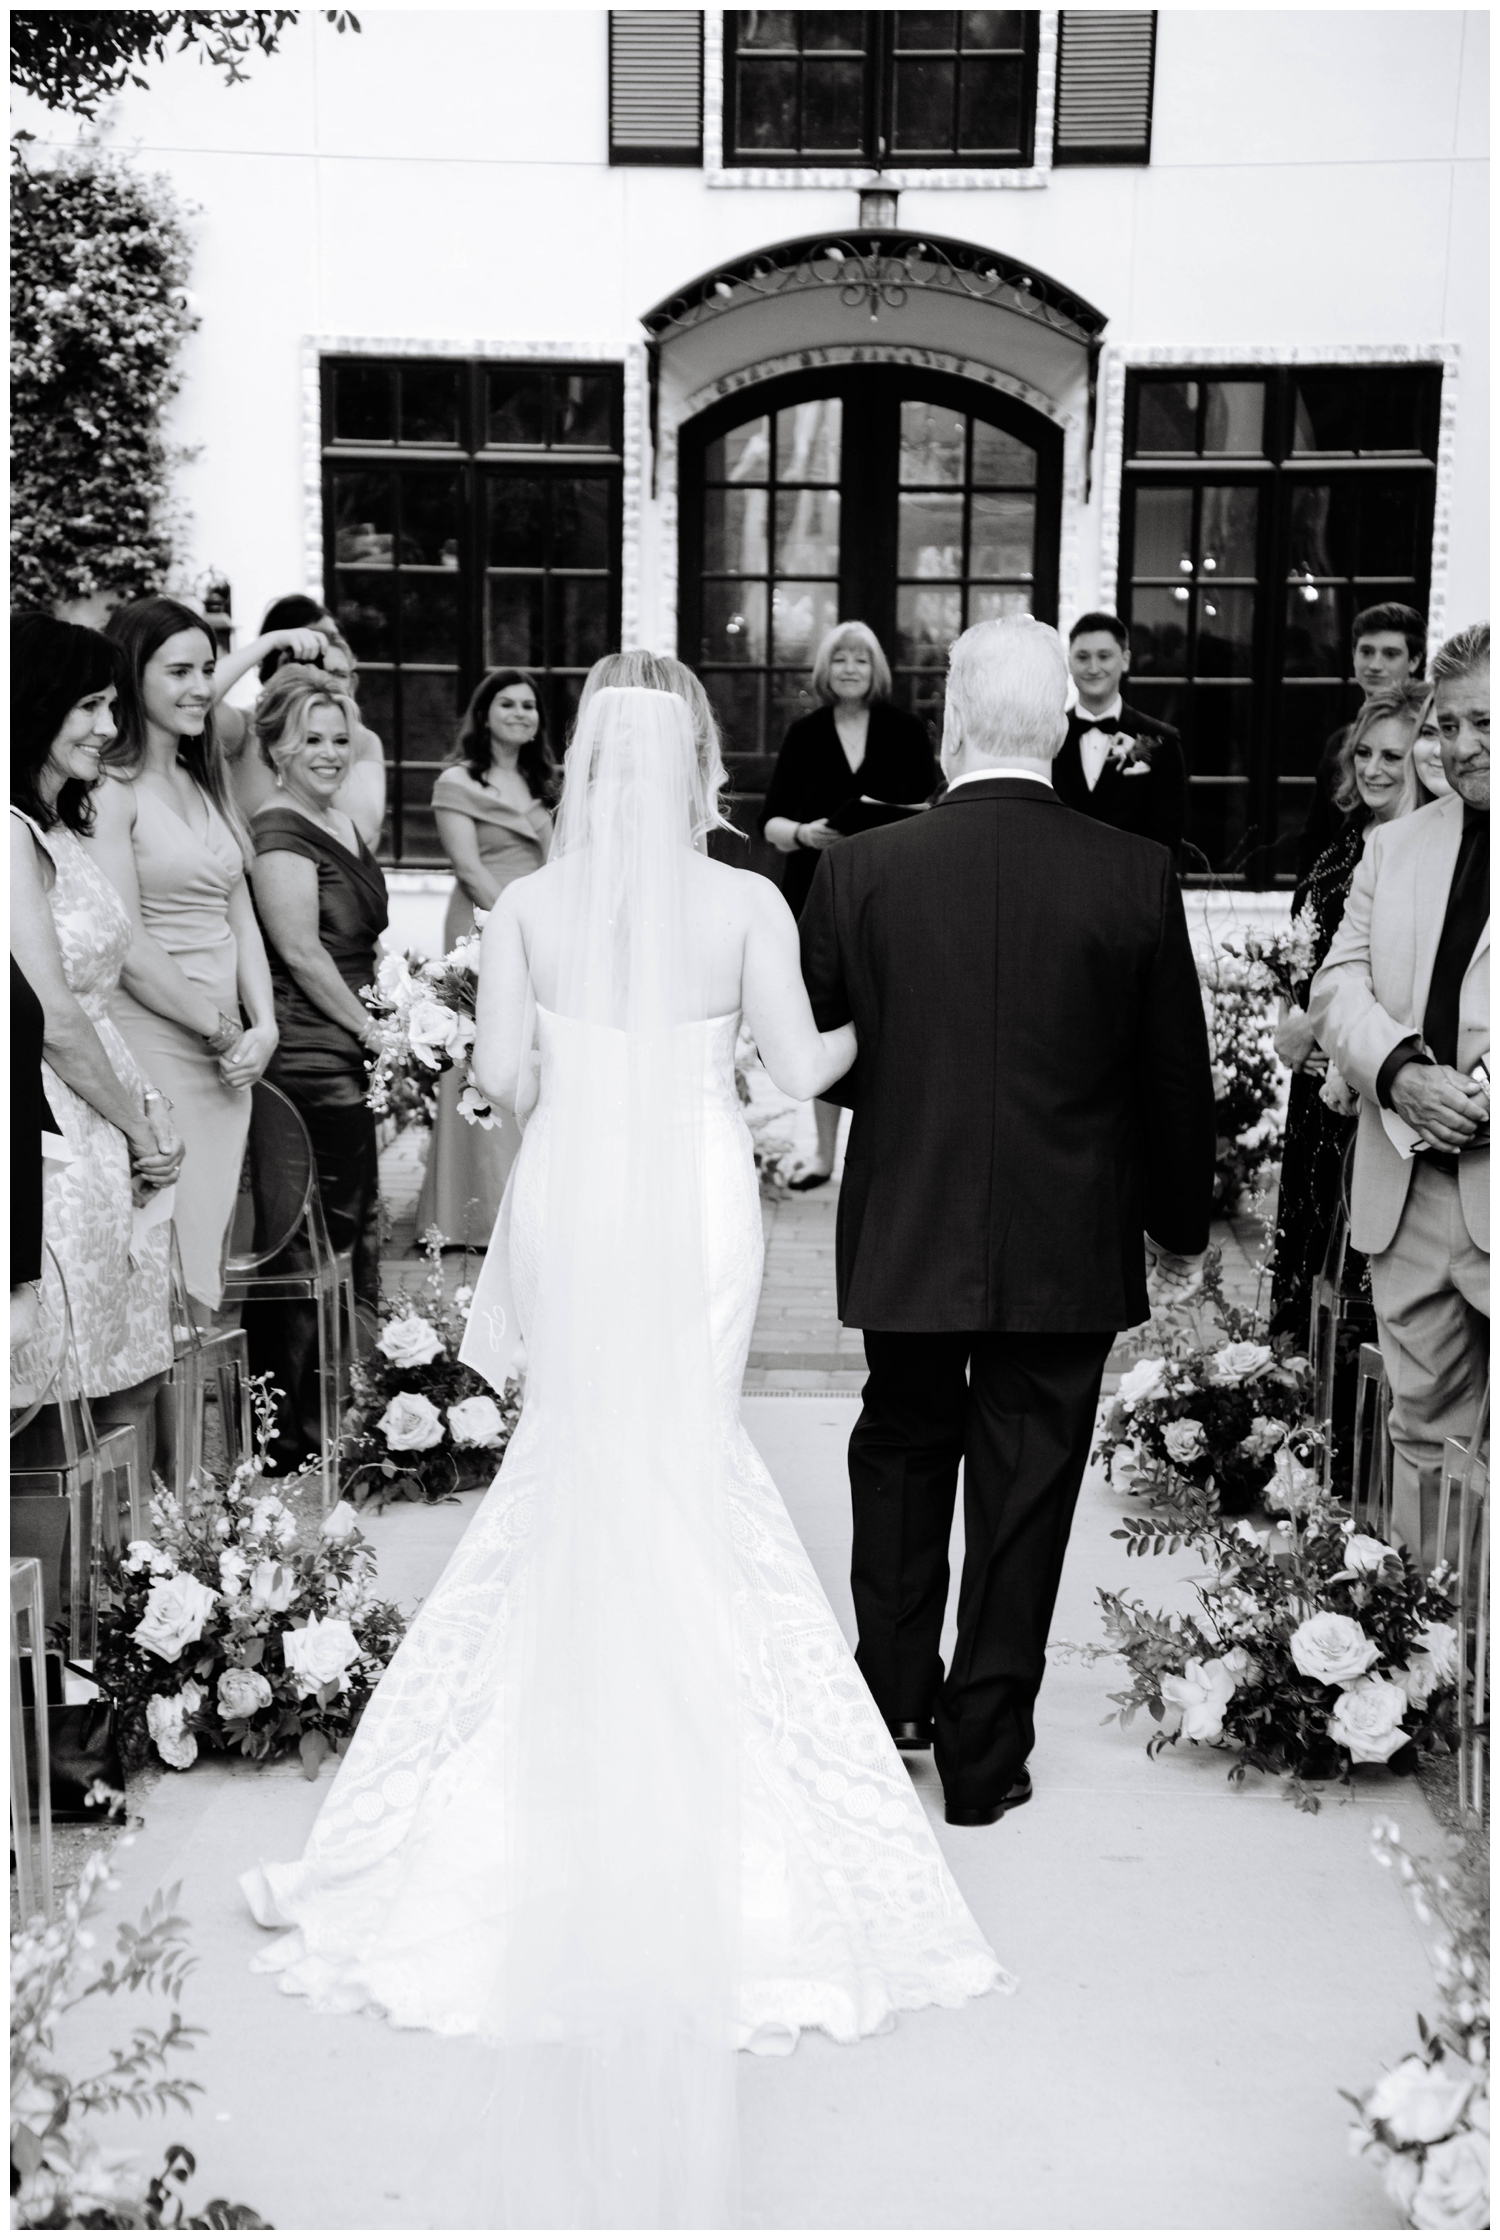 black and white portrait from behind of Dad walking bride down outdoor ceremony aisle at The Peach Orchard Wedding Venue